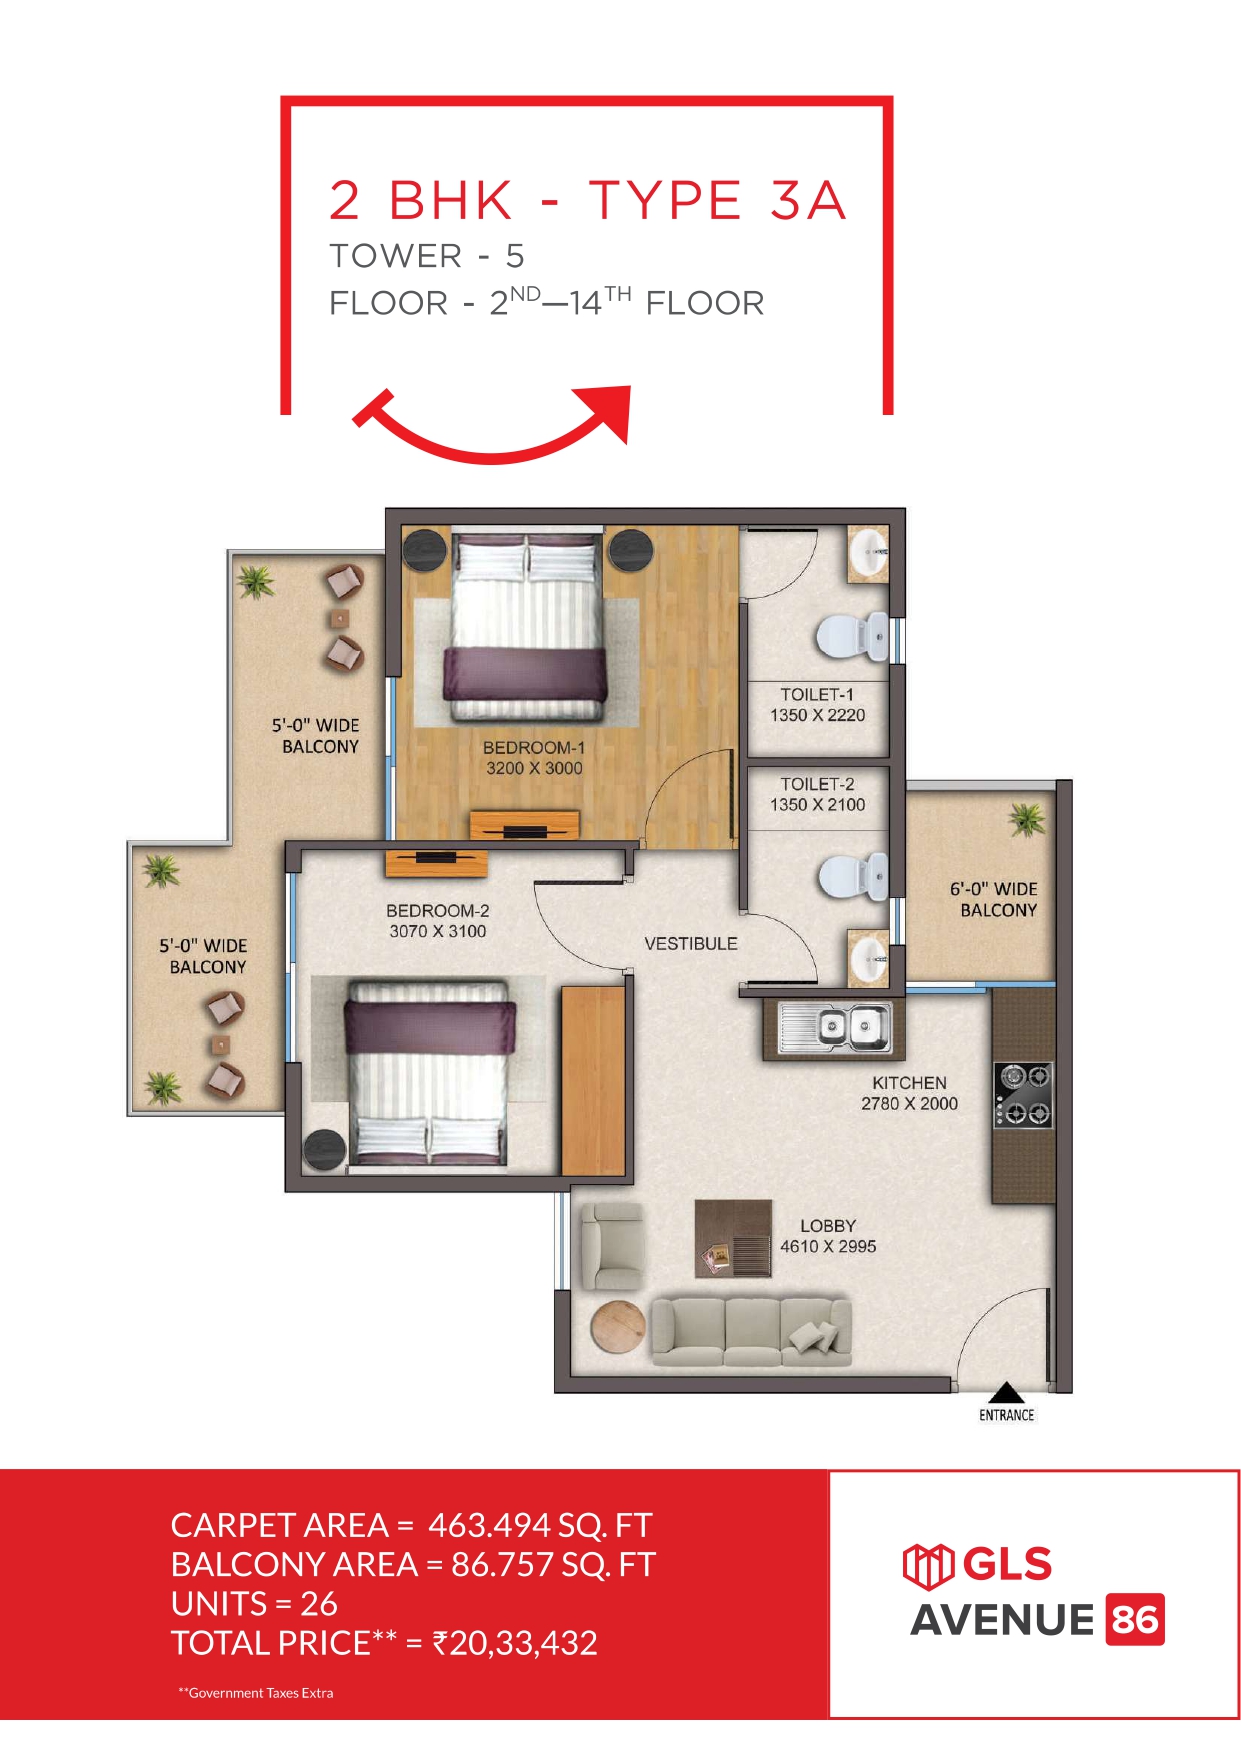 2BHK Type 3A